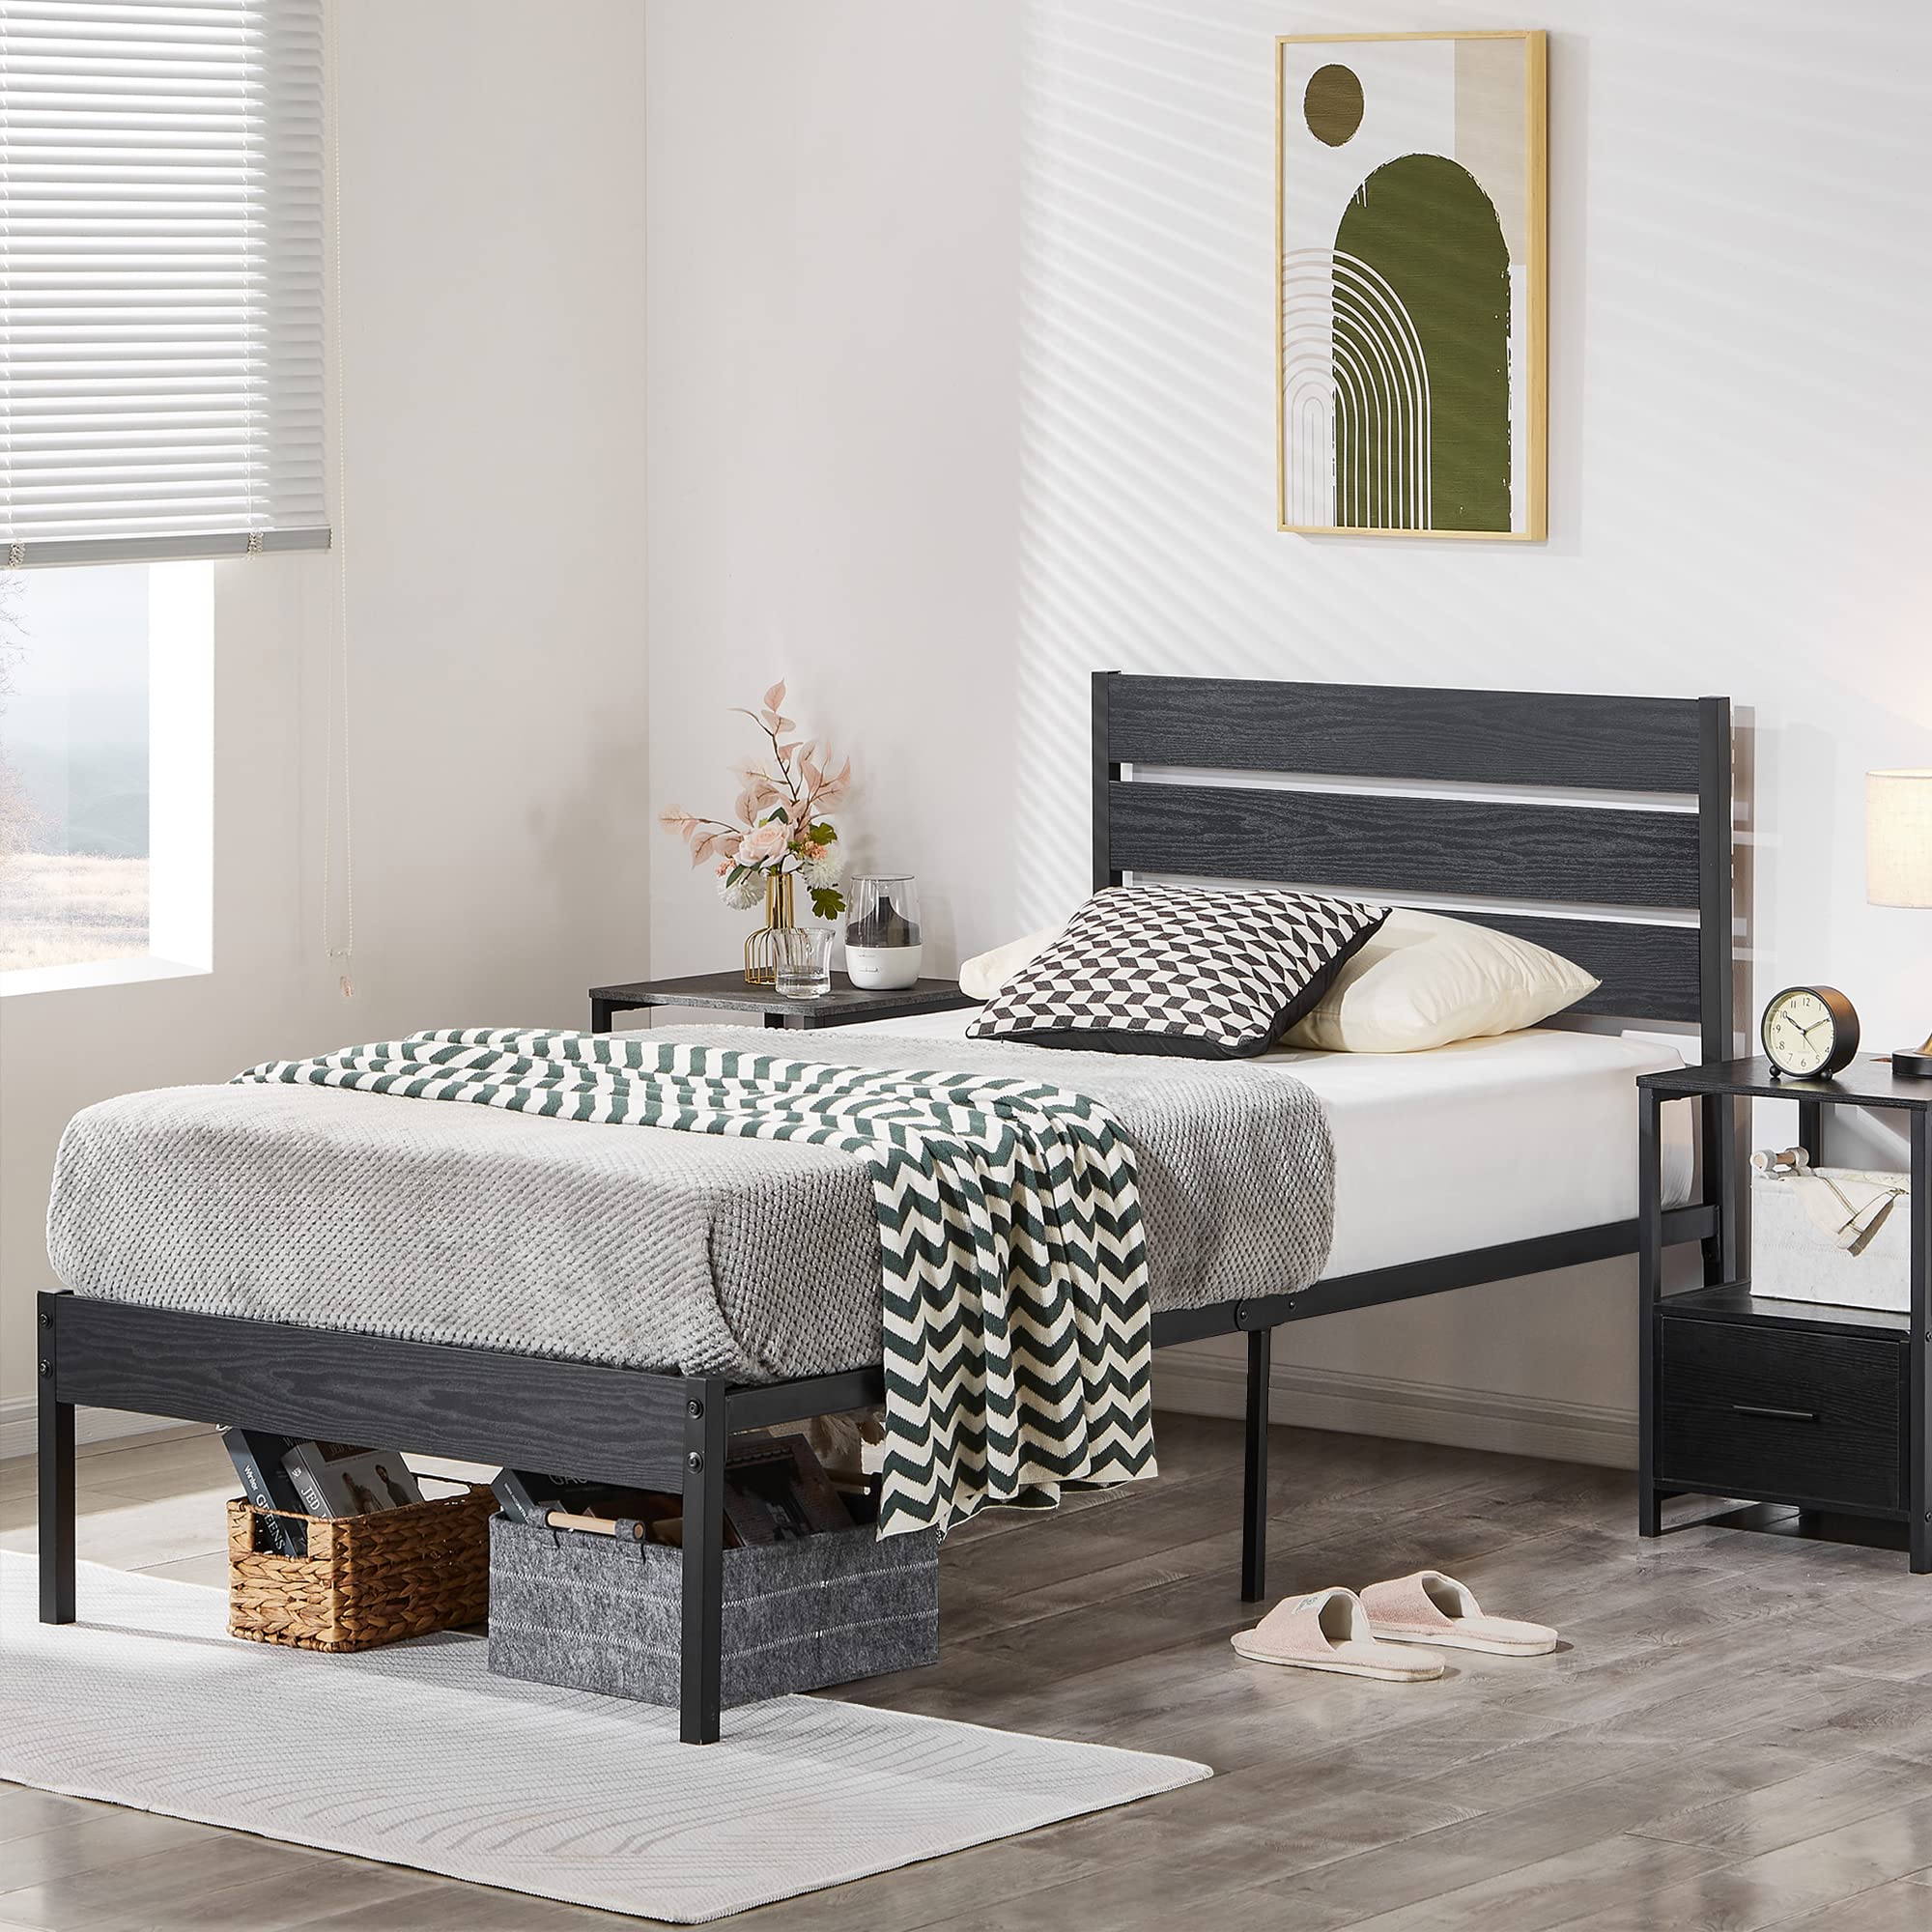 VECELO Platform Full Bed Frame with Rustic Vintage Wood Headboard and Footboard, Mattress Foundation, Strong Metal Slats Support